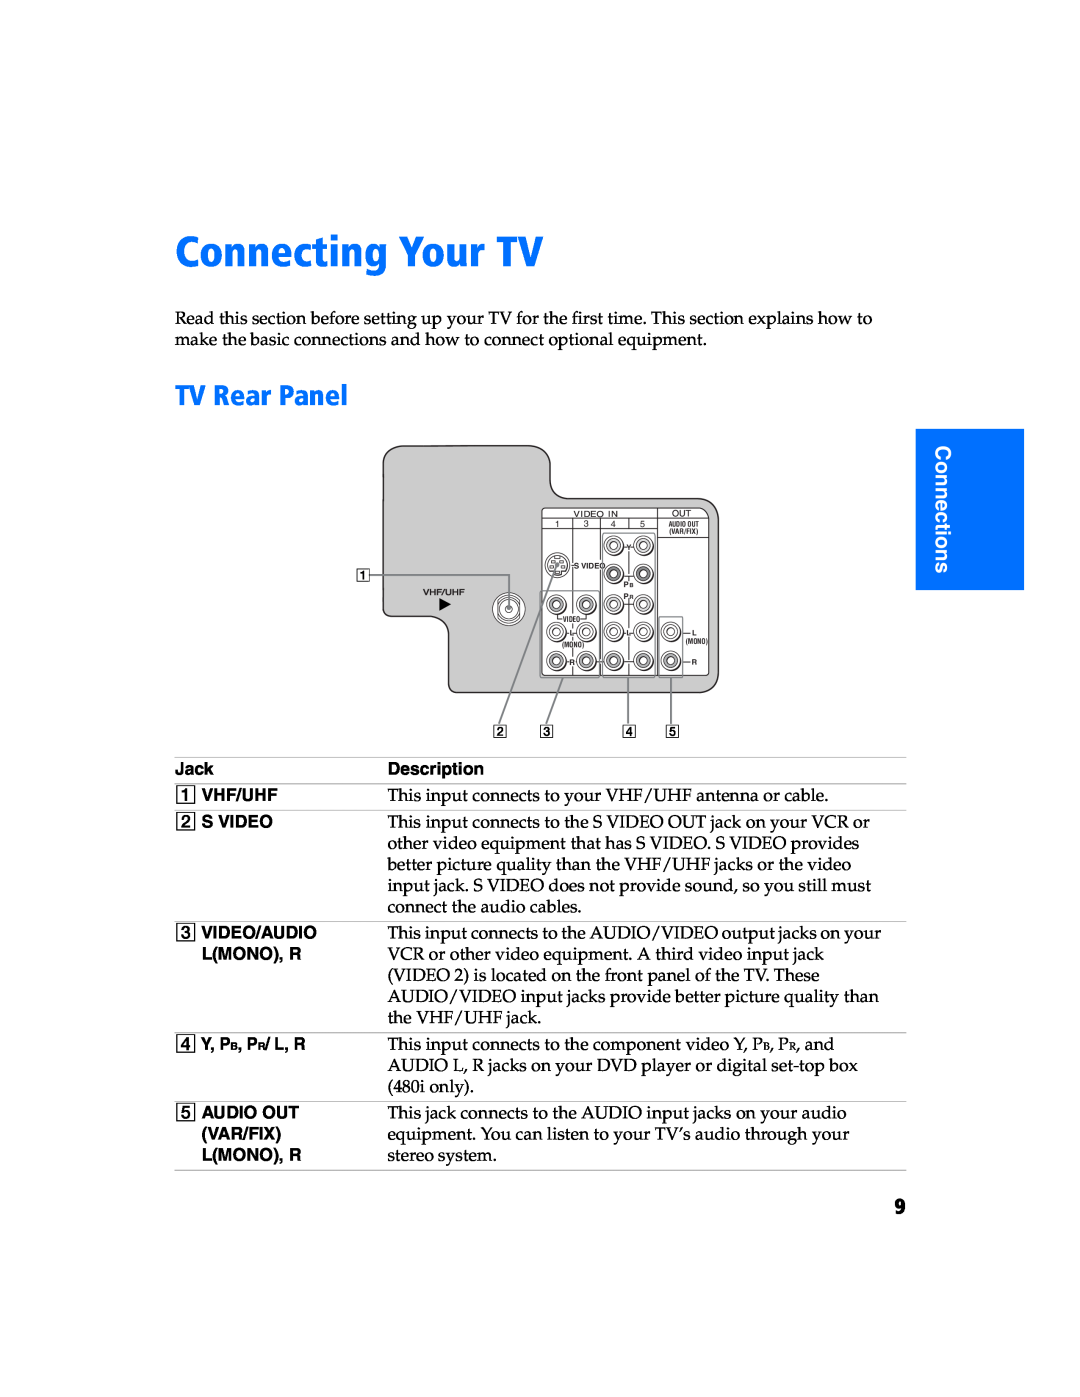 Sony KV 27FS320 manual Connecting Your TV, TV Rear Panel, Connections 